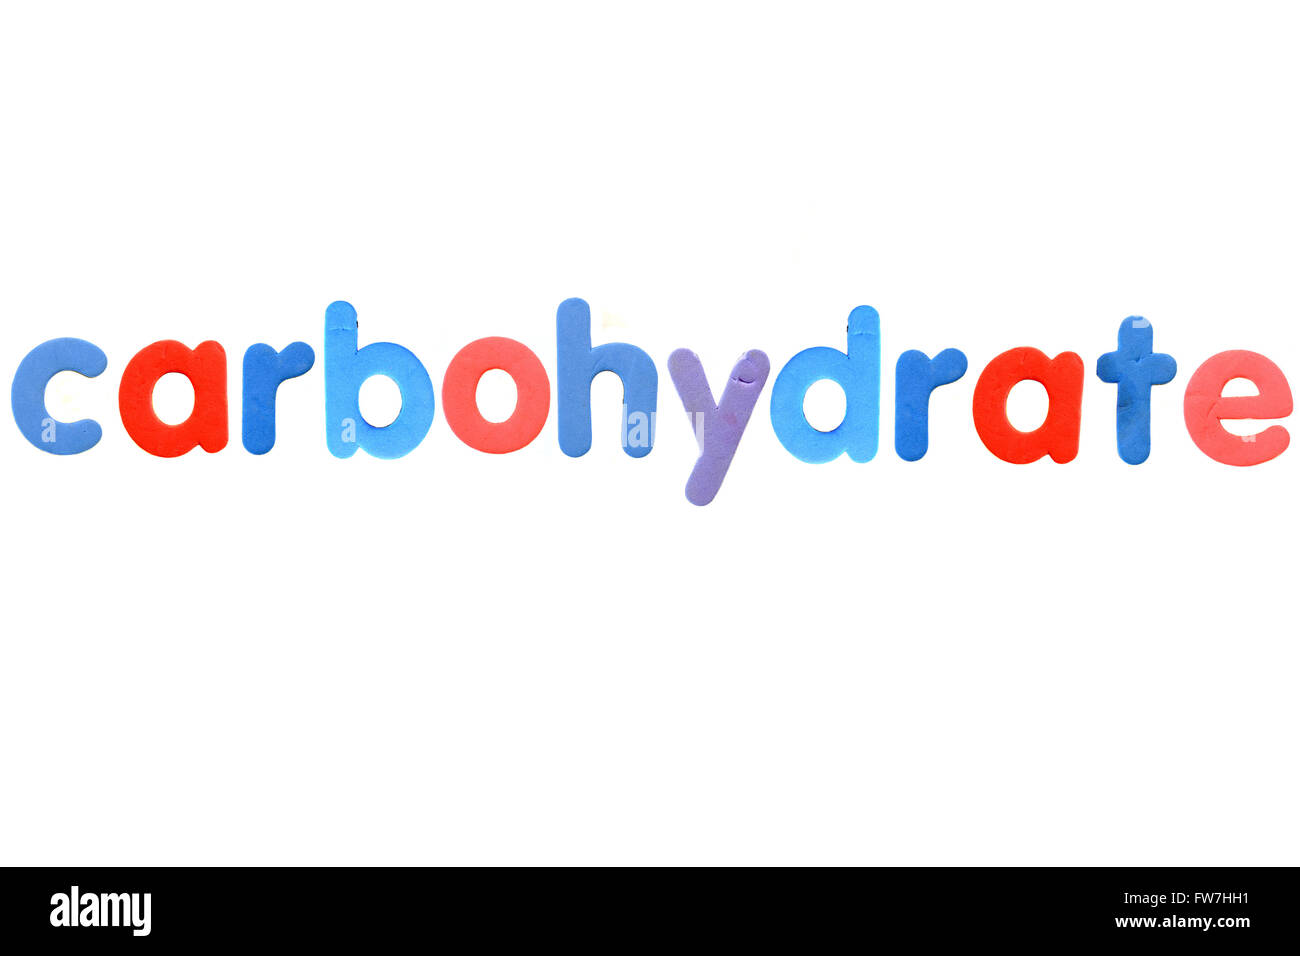 The word Carbohydrate created from magnetic fridge alphabet pieces photographed against a white background. Stock Photo